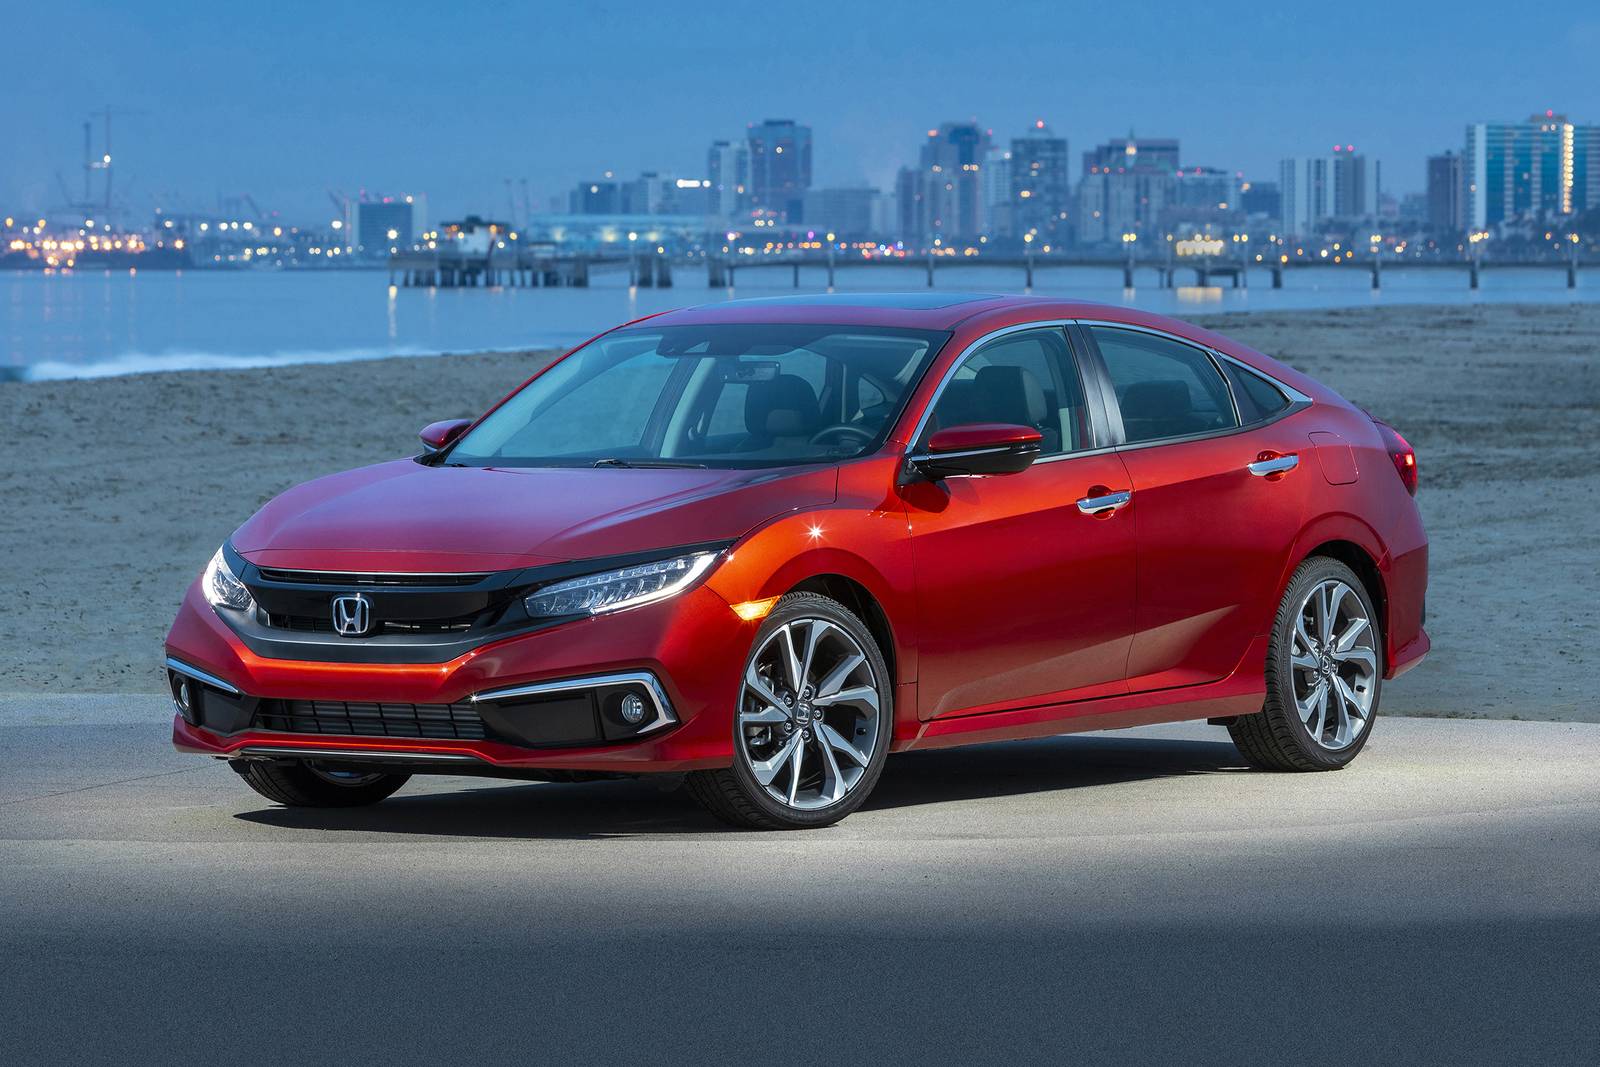 2020 Honda Civic Prices, Reviews, and Pictures | Edmunds